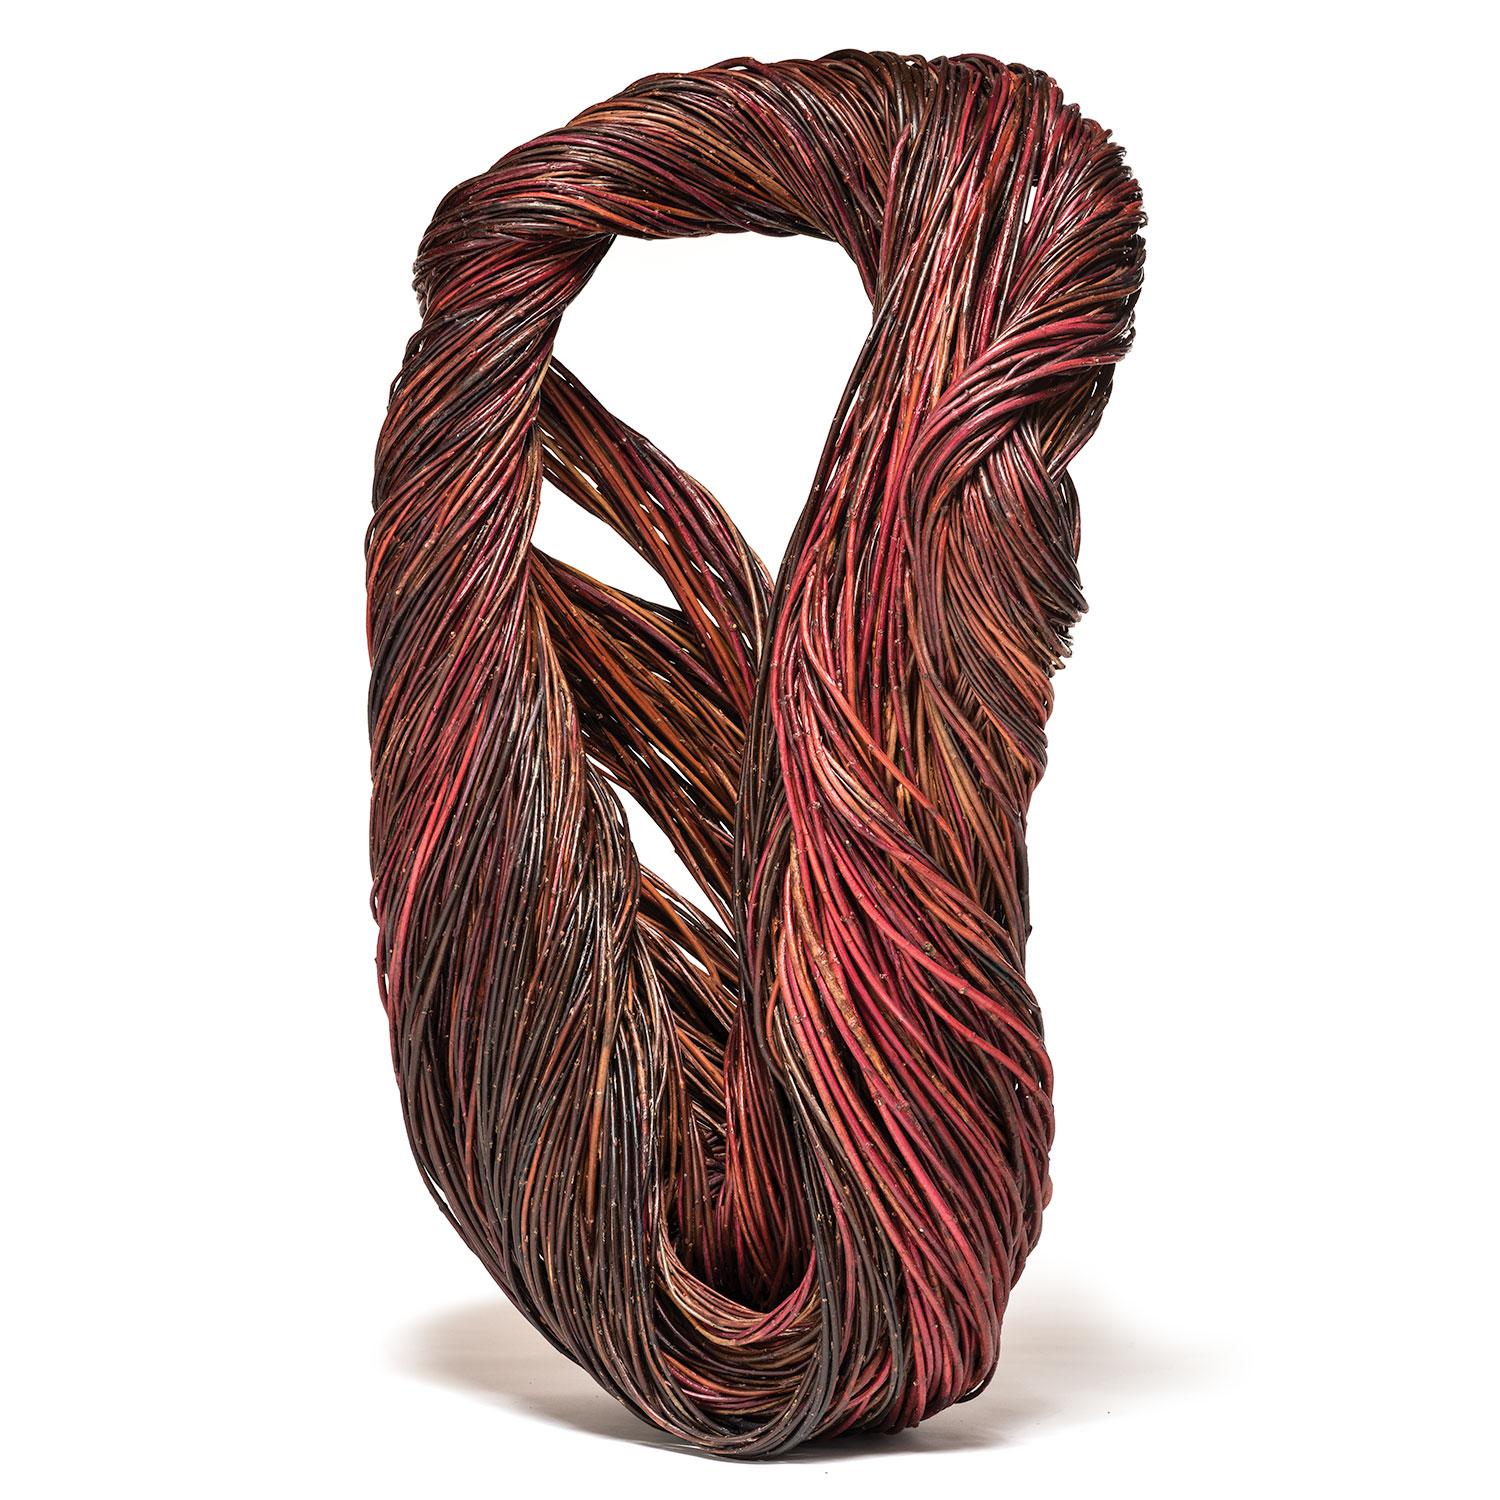 Christine Joy Abstract Sculpture - "Lily" Contemporary Abstract, Biomorphic Willow Basket Sculpture